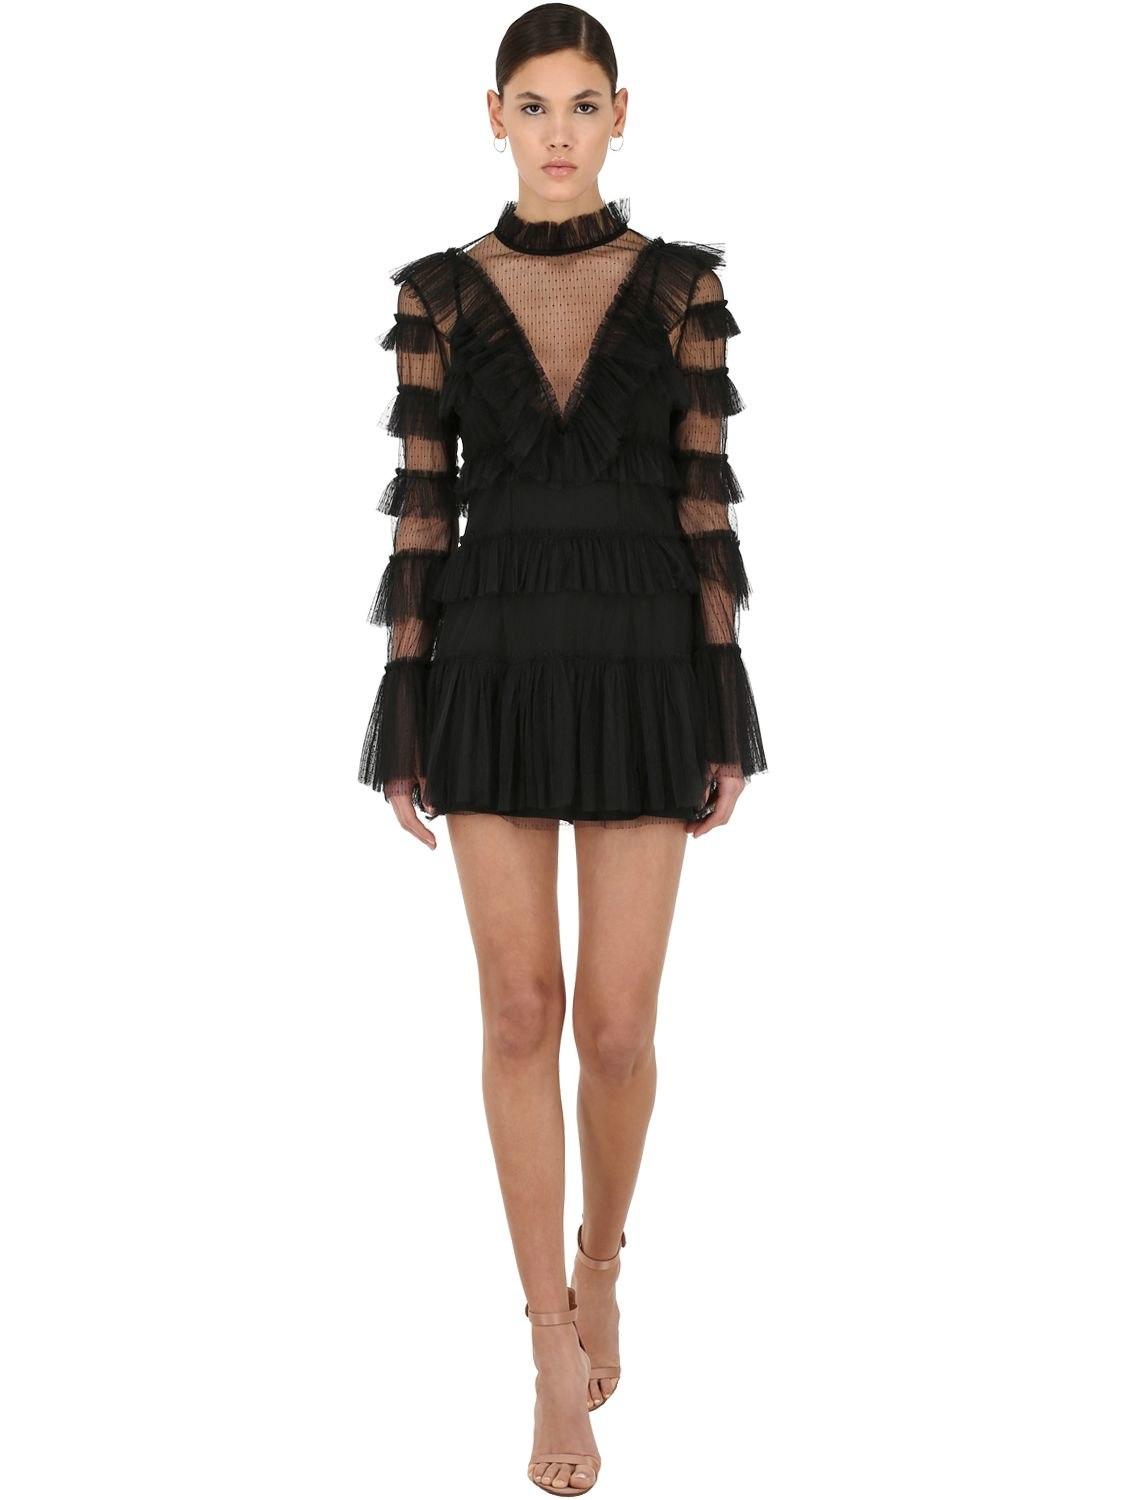 Alice McCall Forever Young Dress | vlr.eng.br